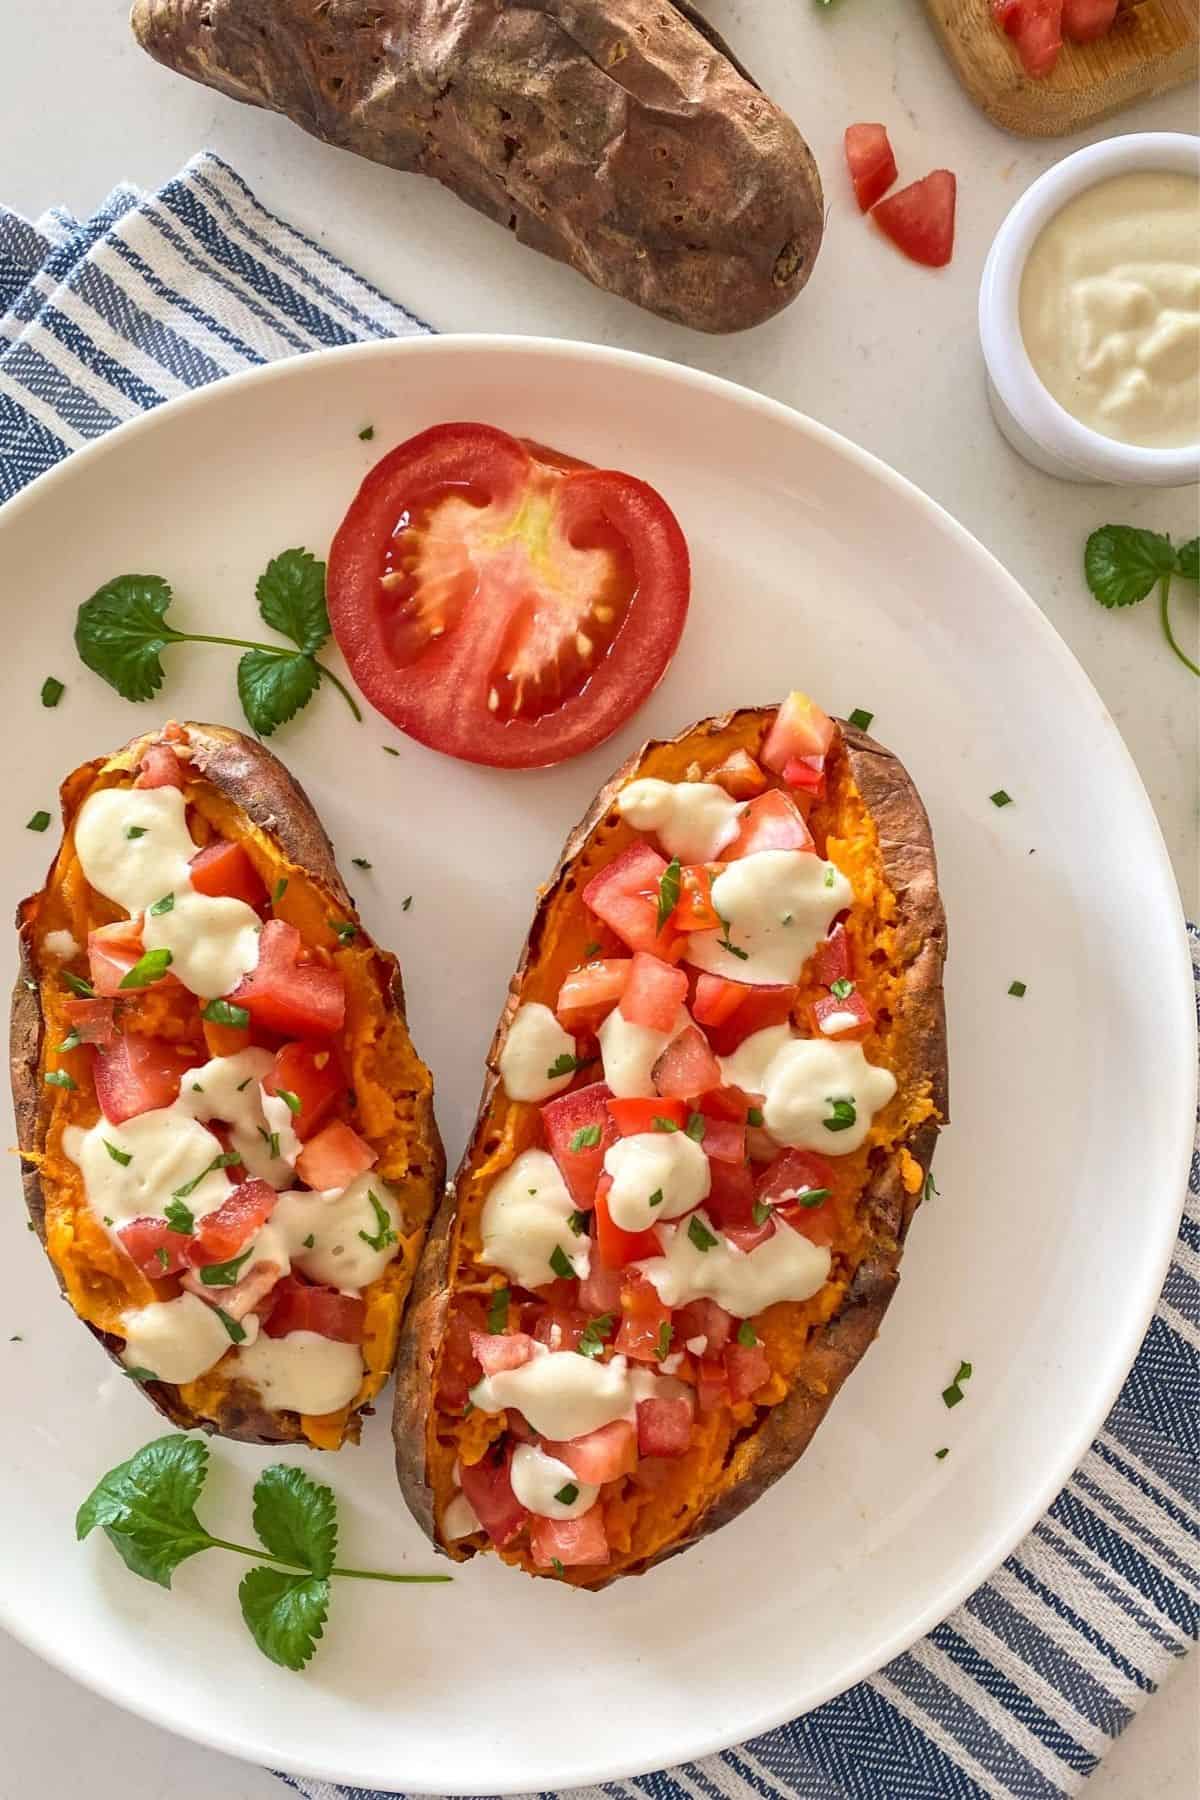 Baked sweet potatoes in white plate with sour cream, tomato and parsley on top.